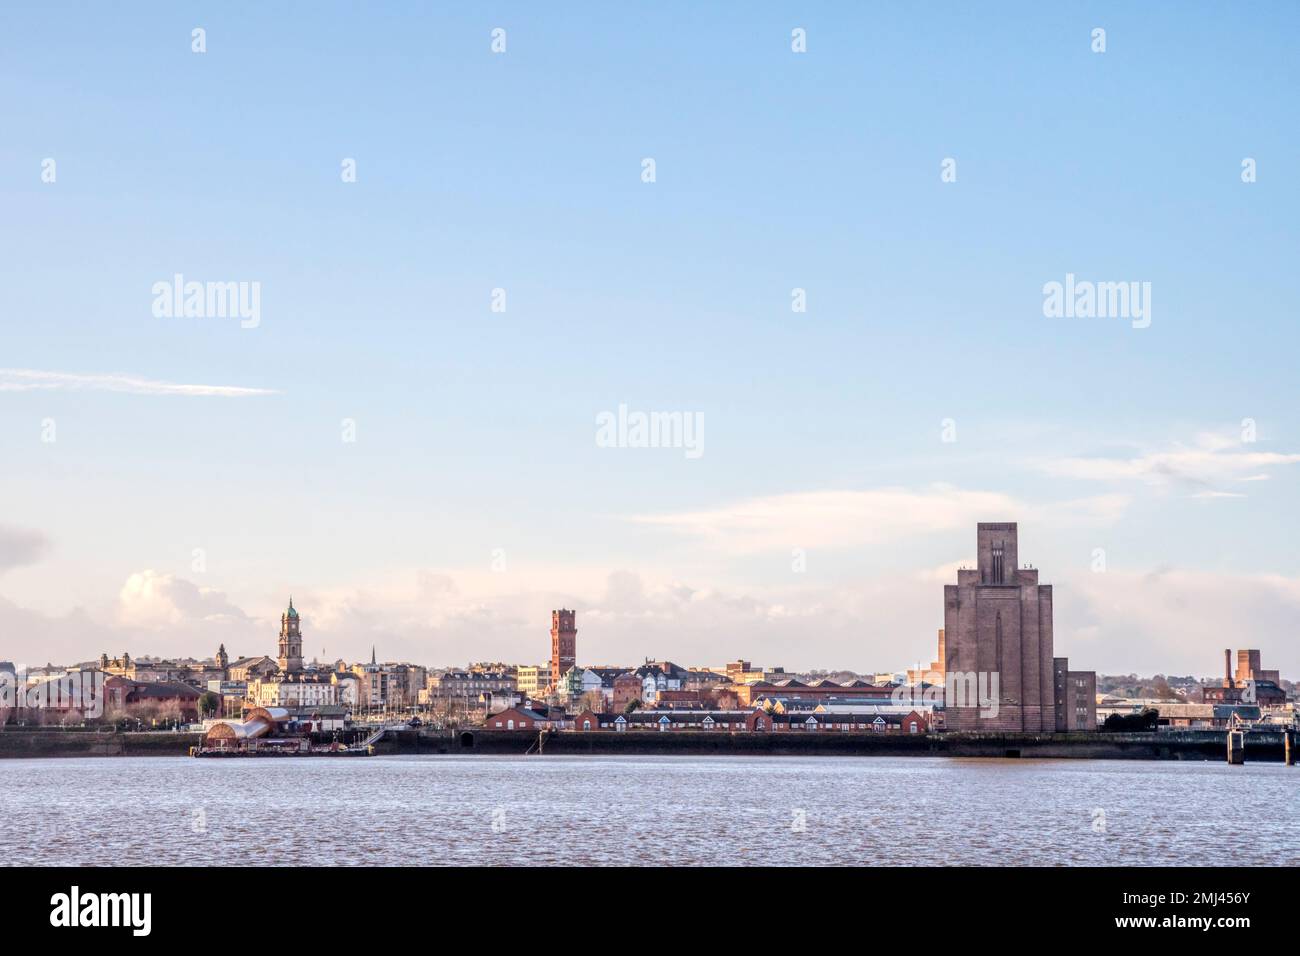 Birkenhead waterfront seen across the River Mersey from Liverpool.  Tall structure to the right is a ventilation shaft for the Queensway Mersey Tunnel Stock Photo